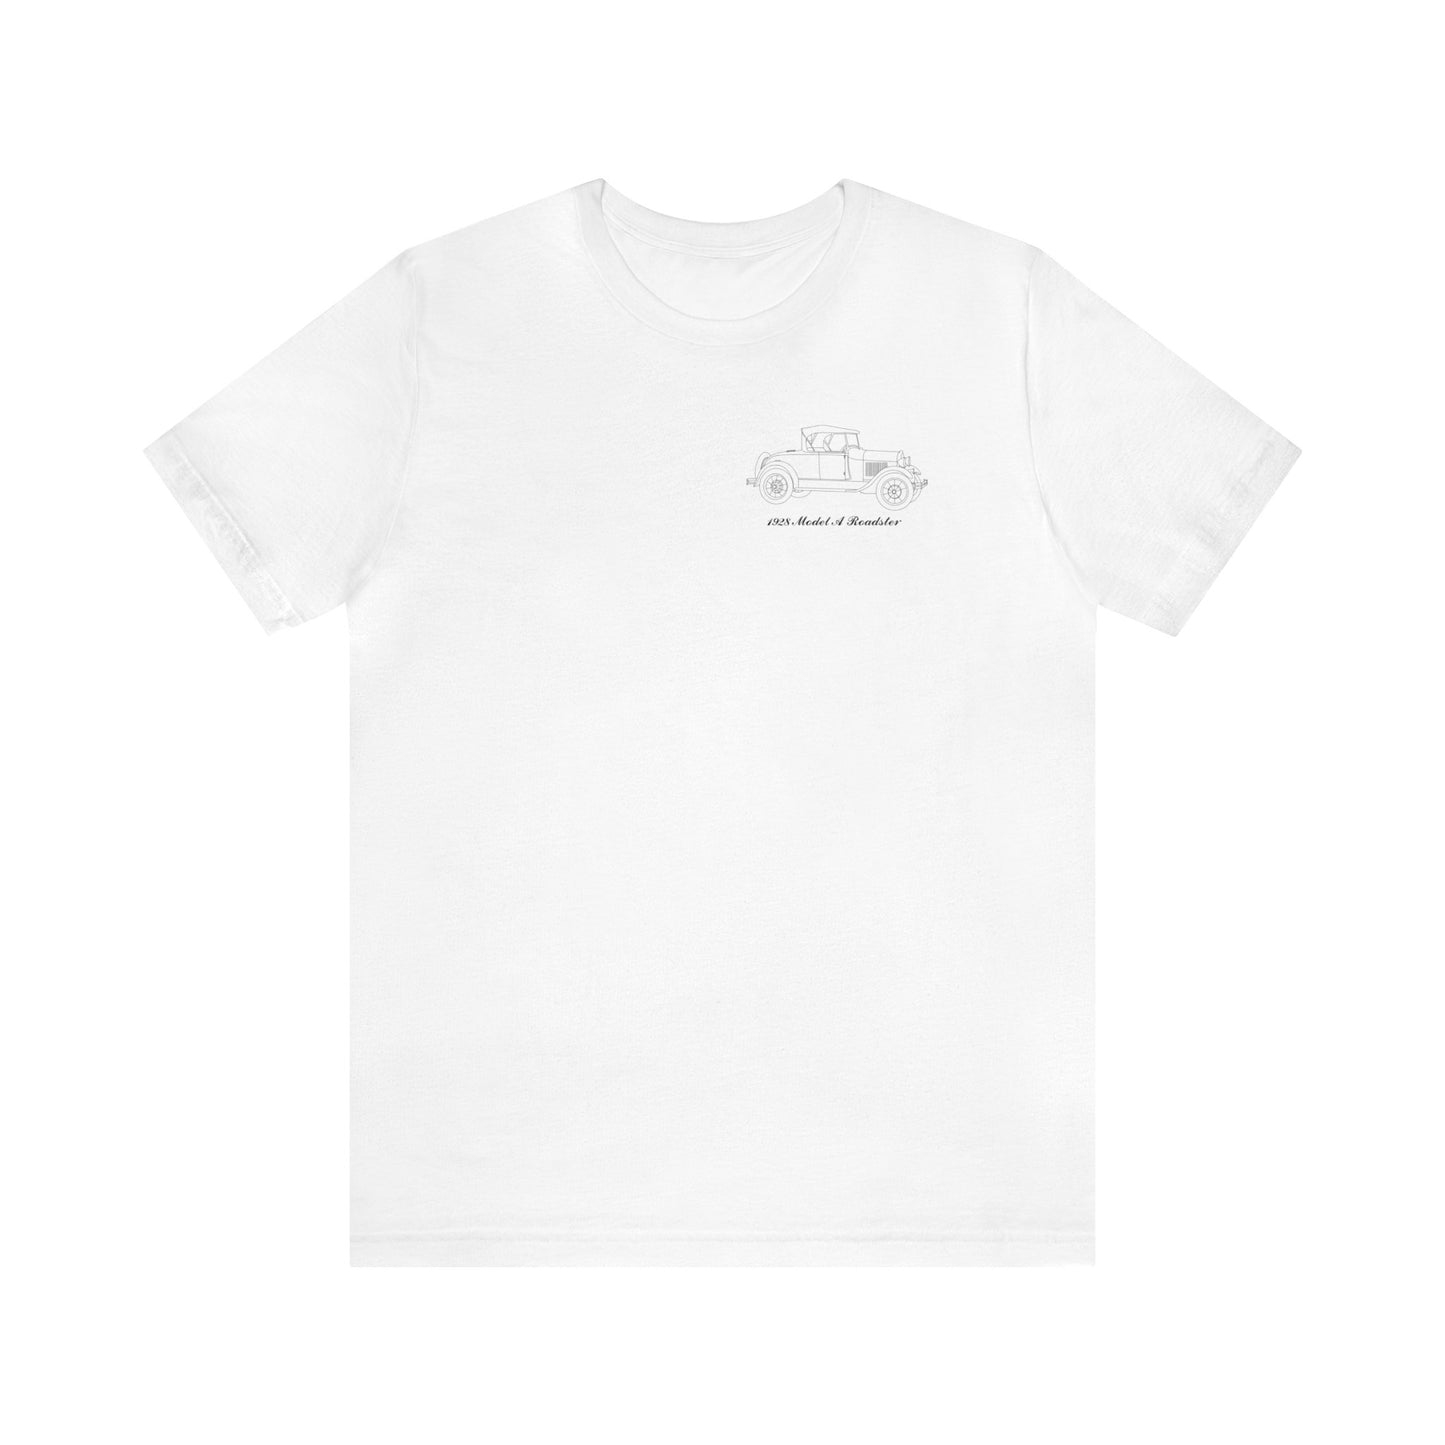 1929 Delivery T-Shirt